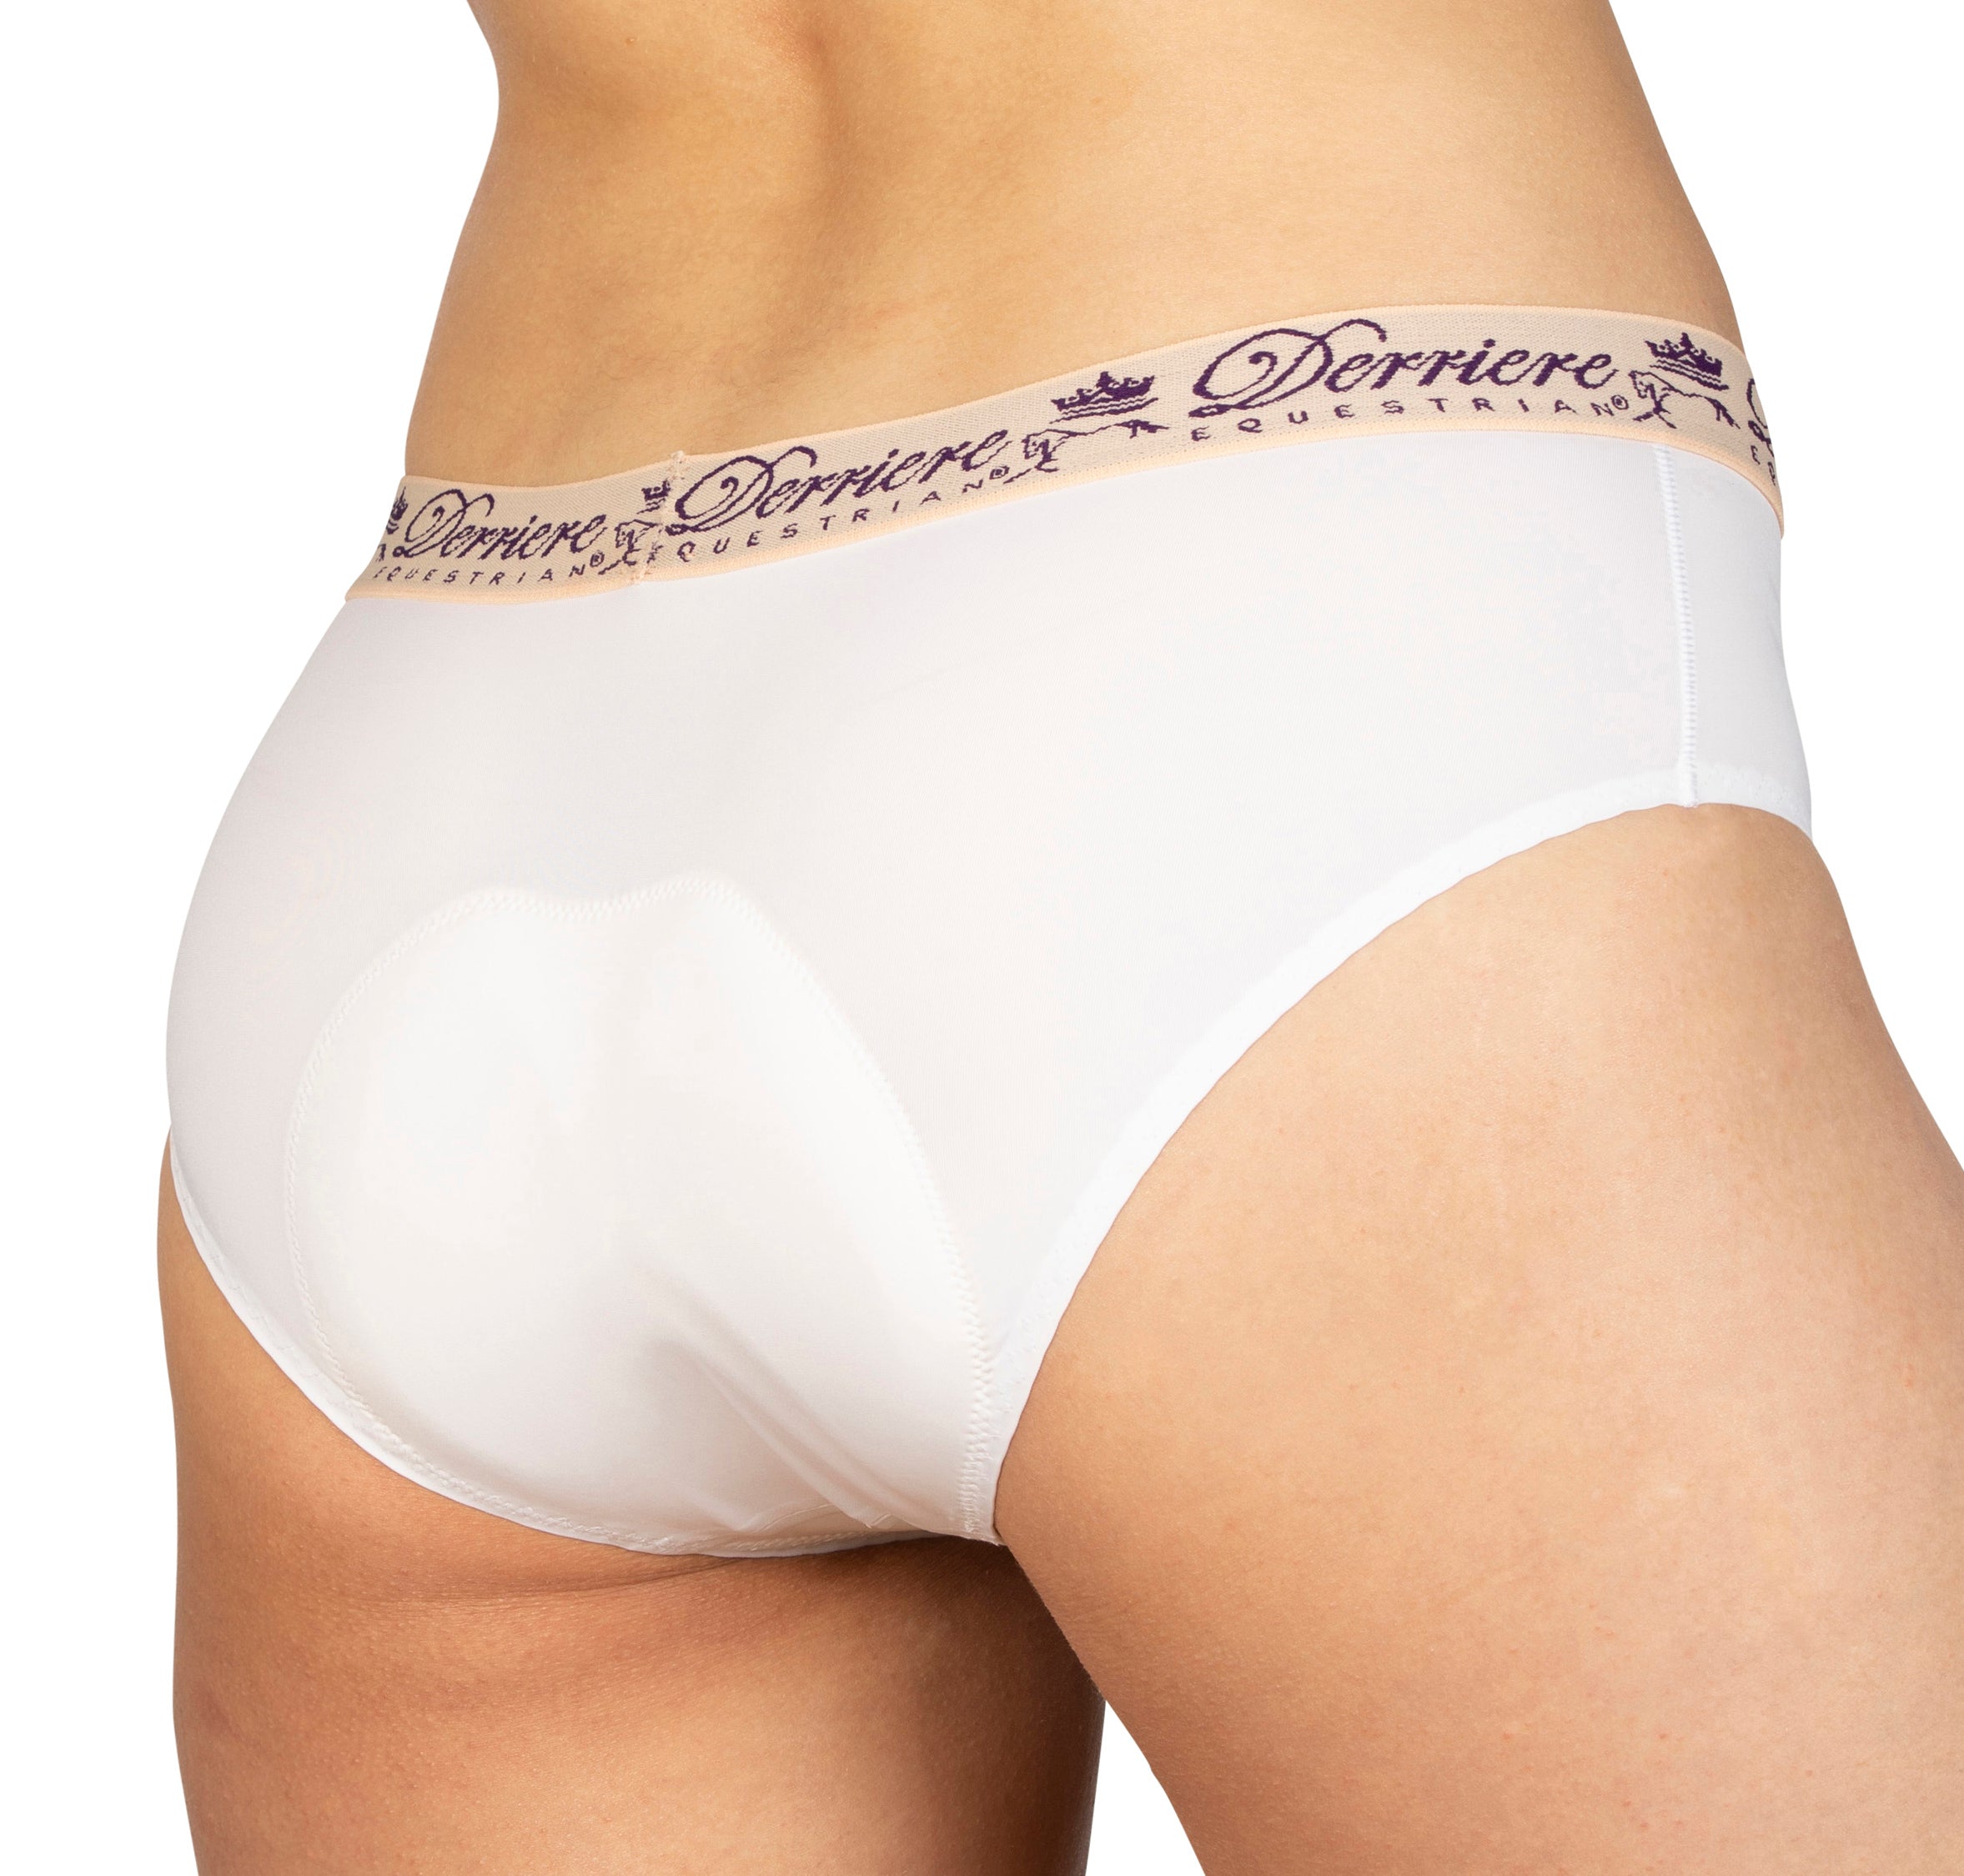 Padded Panties - How To Boost Your Derriere